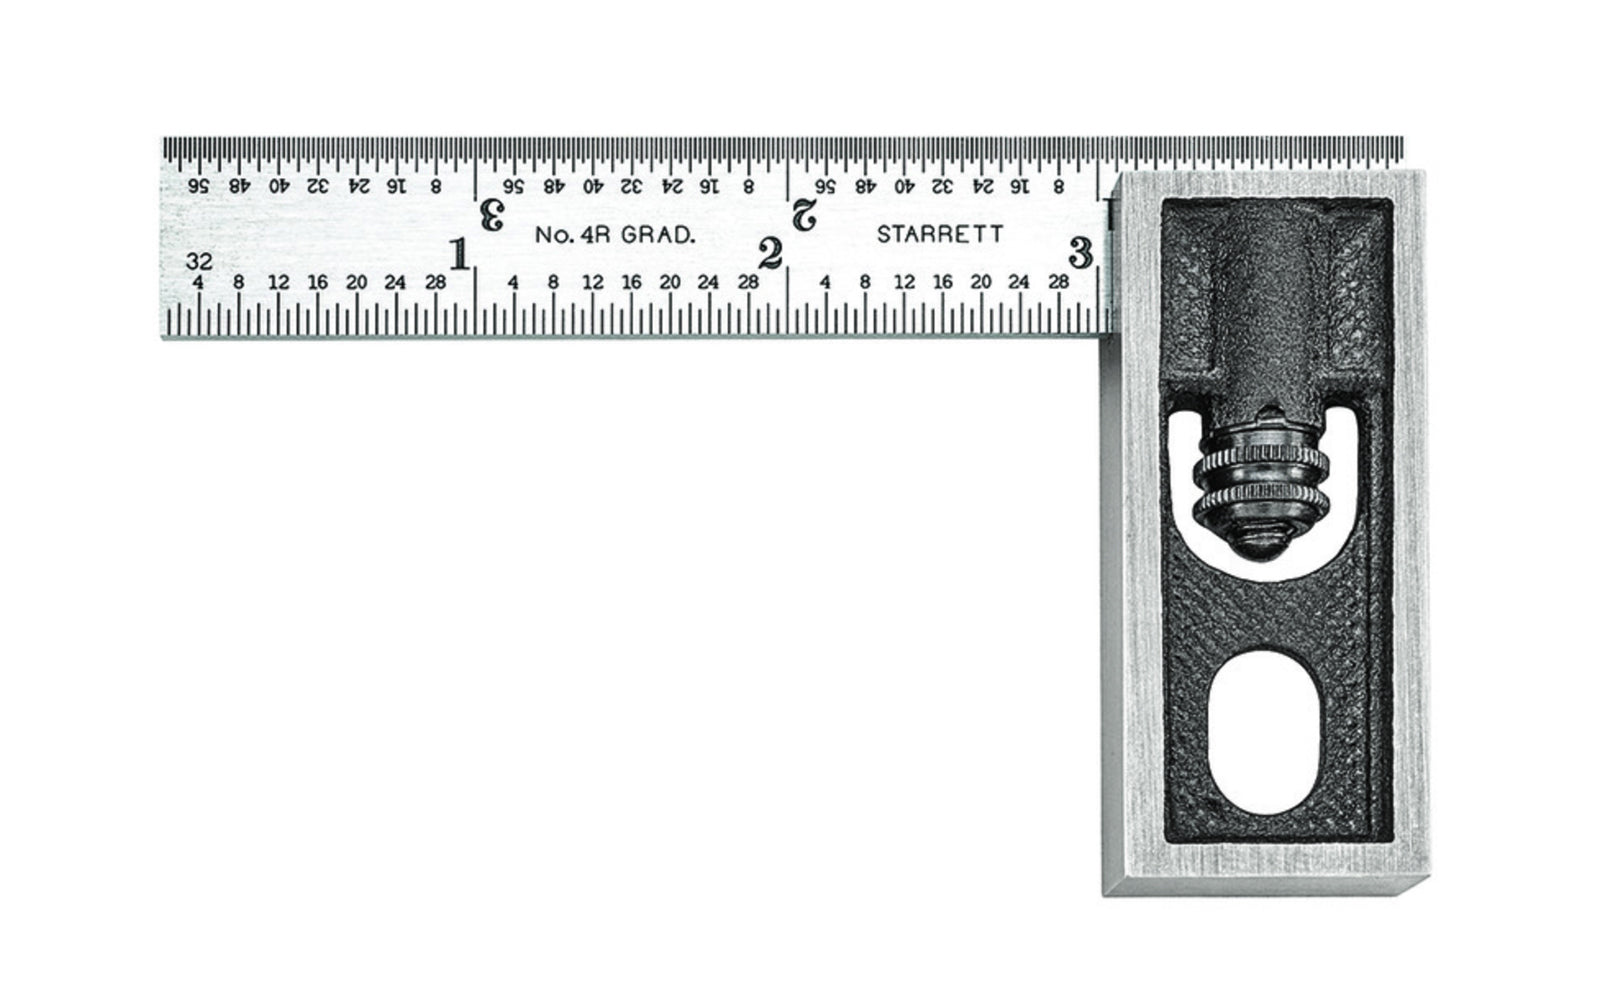 Starrett Inch Reading Double Square is very popular with machinists, toolmakers, & patternmakers. The sliding blades are adjustable making it practical for a wide variety of uses. The faces of the head are ground square. 4